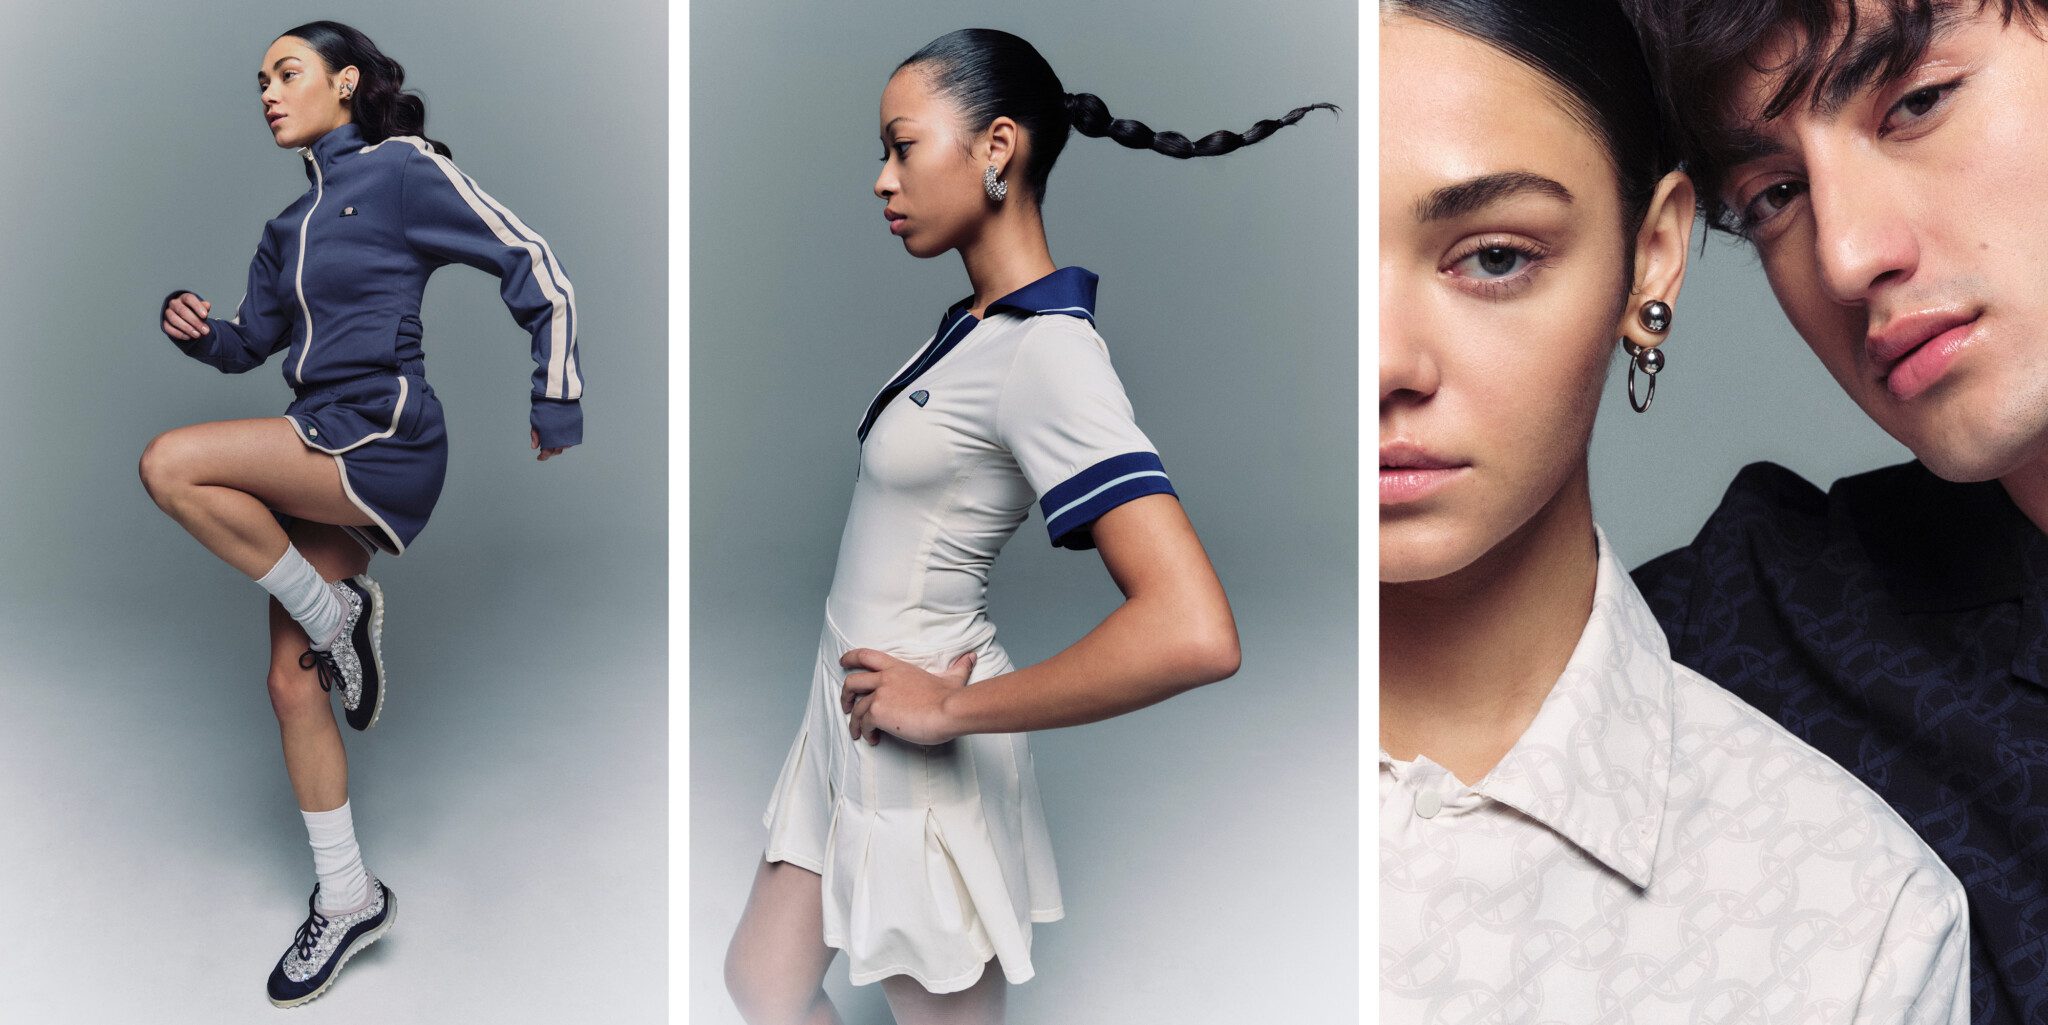 Introducing a new shareable unisex wardrobe from Ellesse